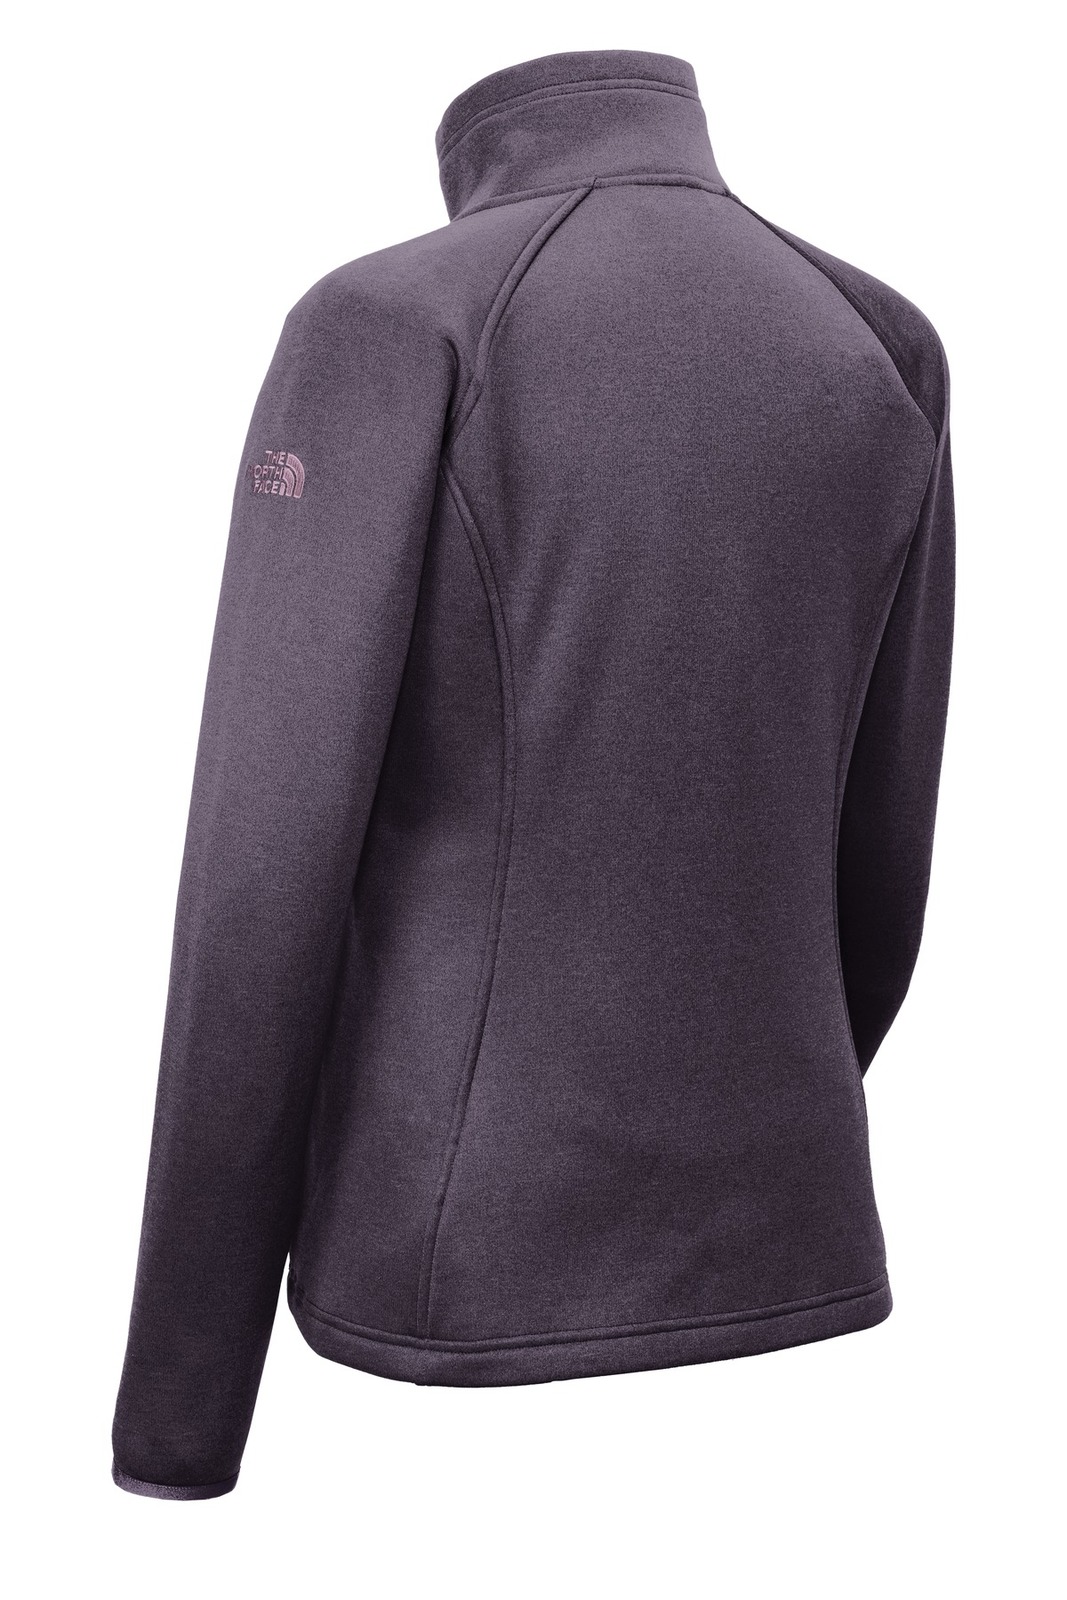 The North Face NF0A3LHA Ladies Canyon Flats Stretch Fleece Jacket3